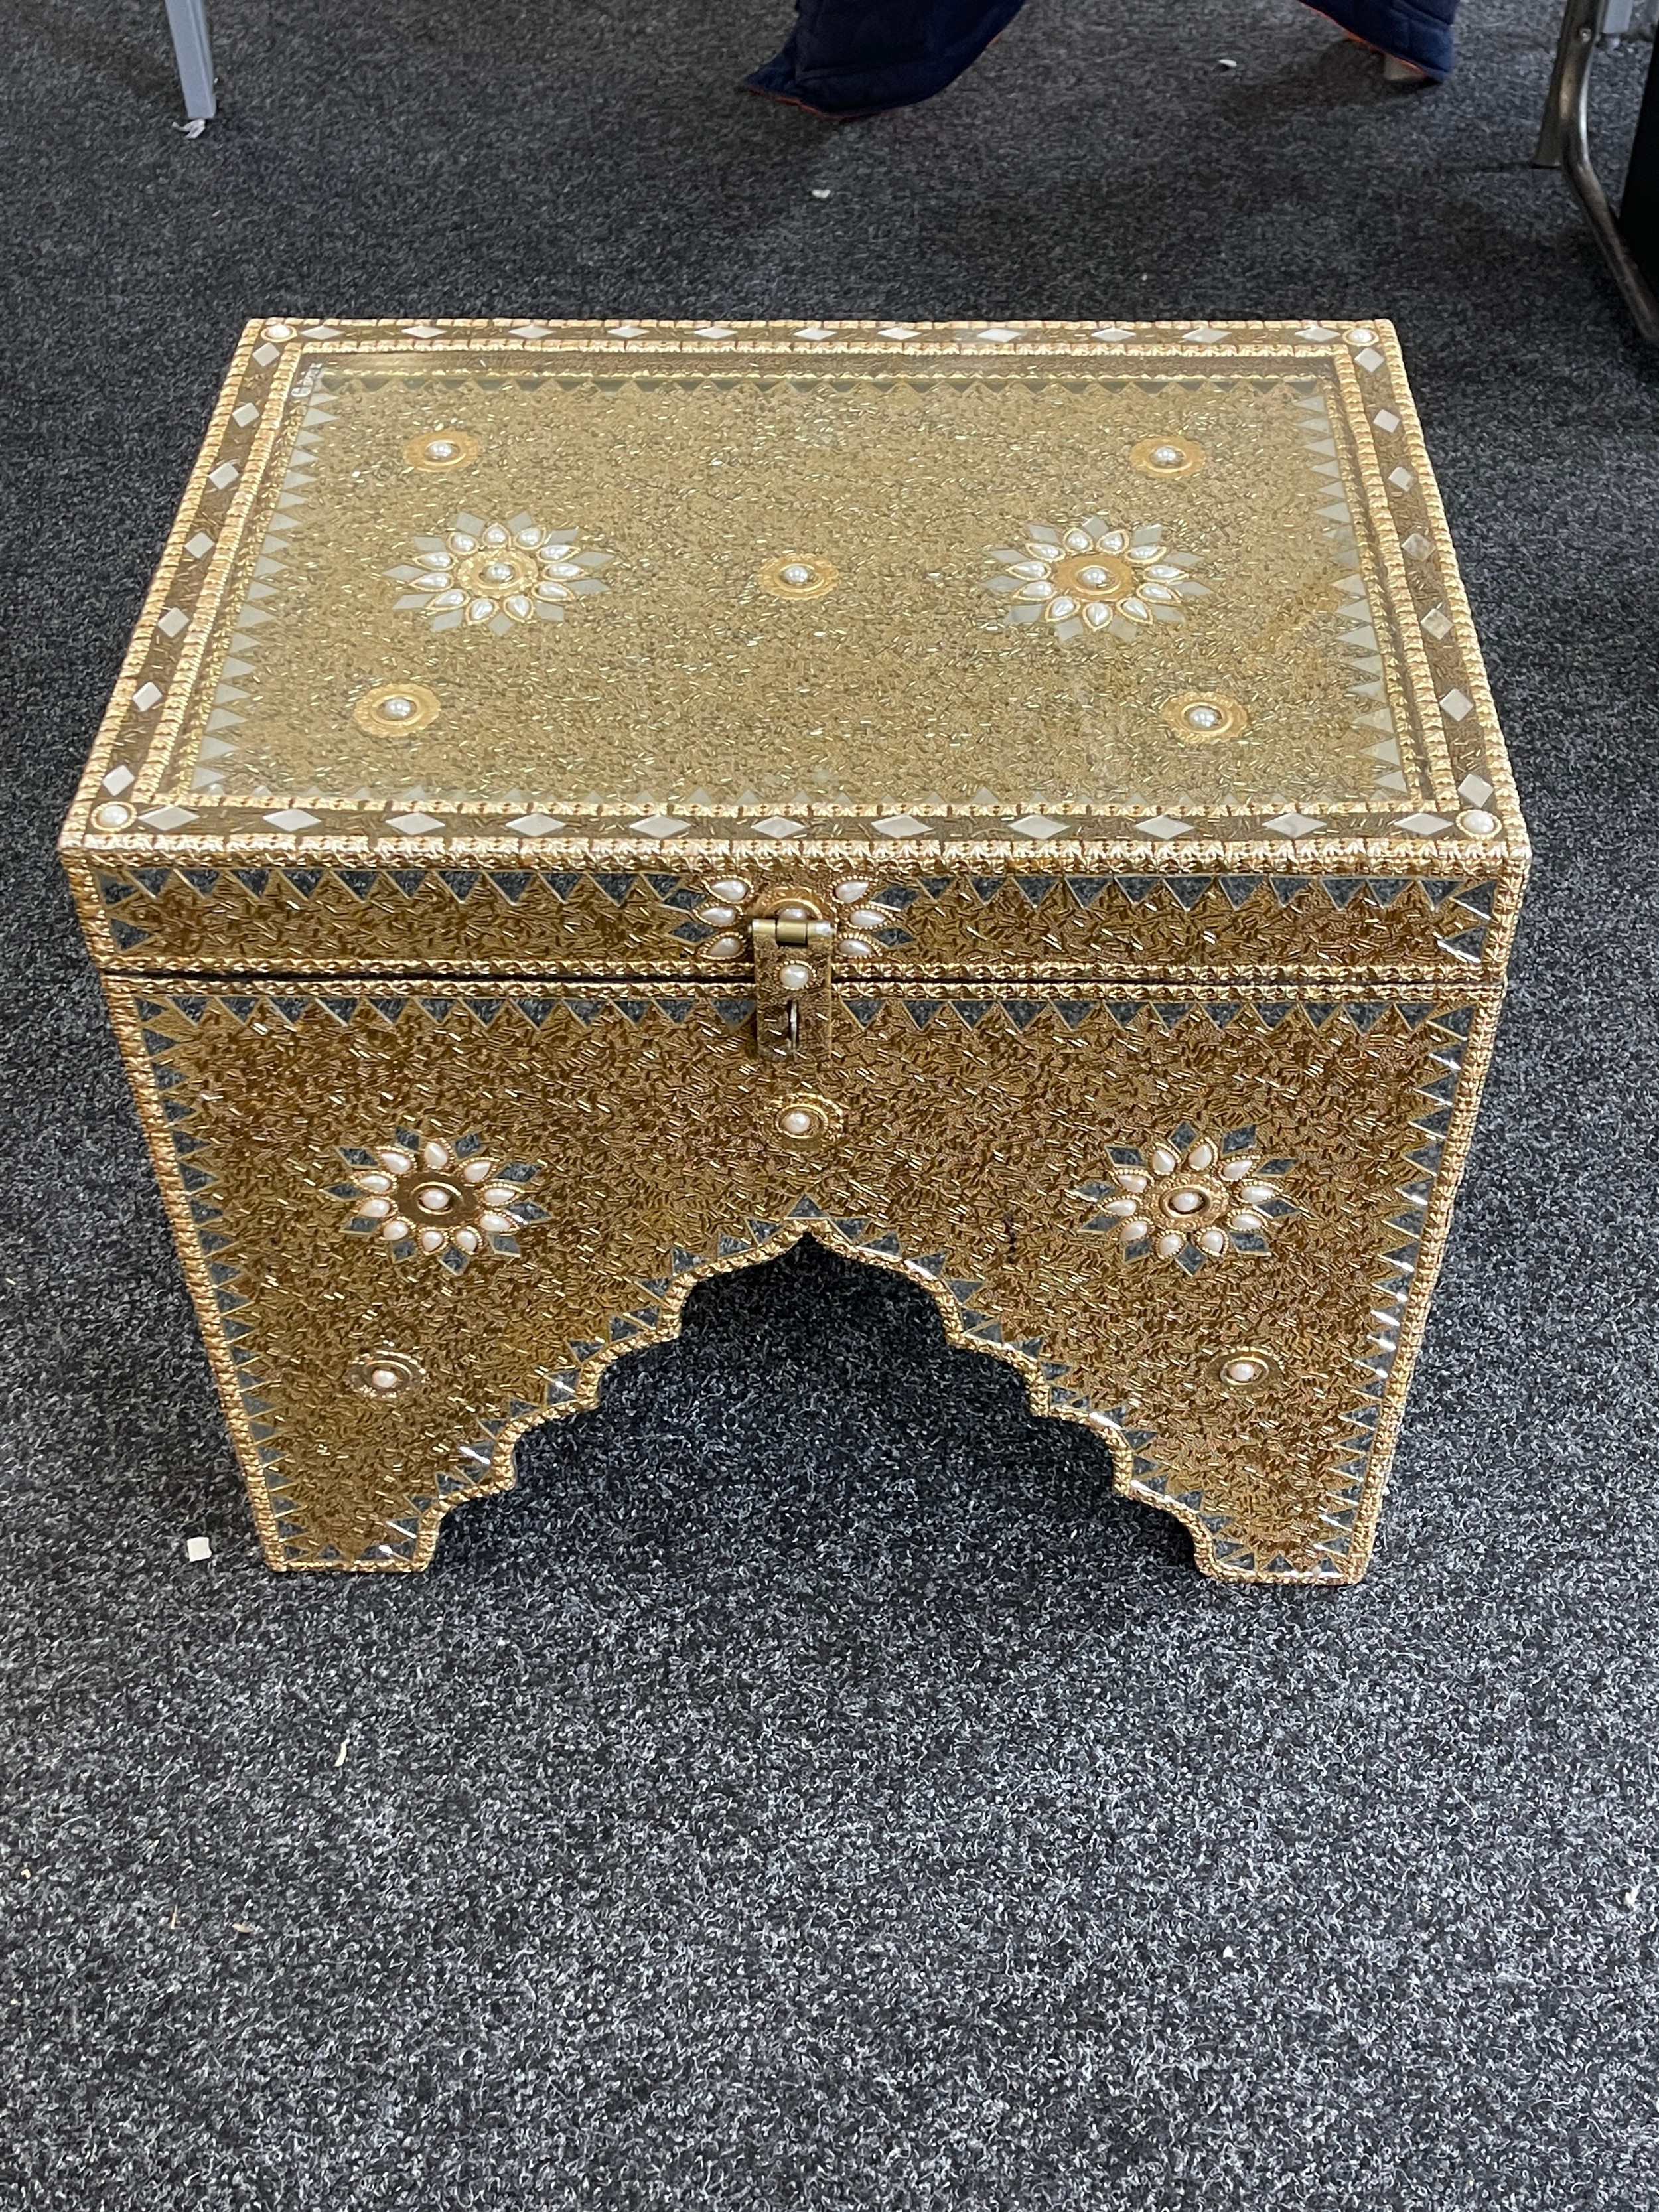 Indian style coffee table with lift up lid, Height 19 inches, Width 22 inches, Depth 16 inches - Image 3 of 6